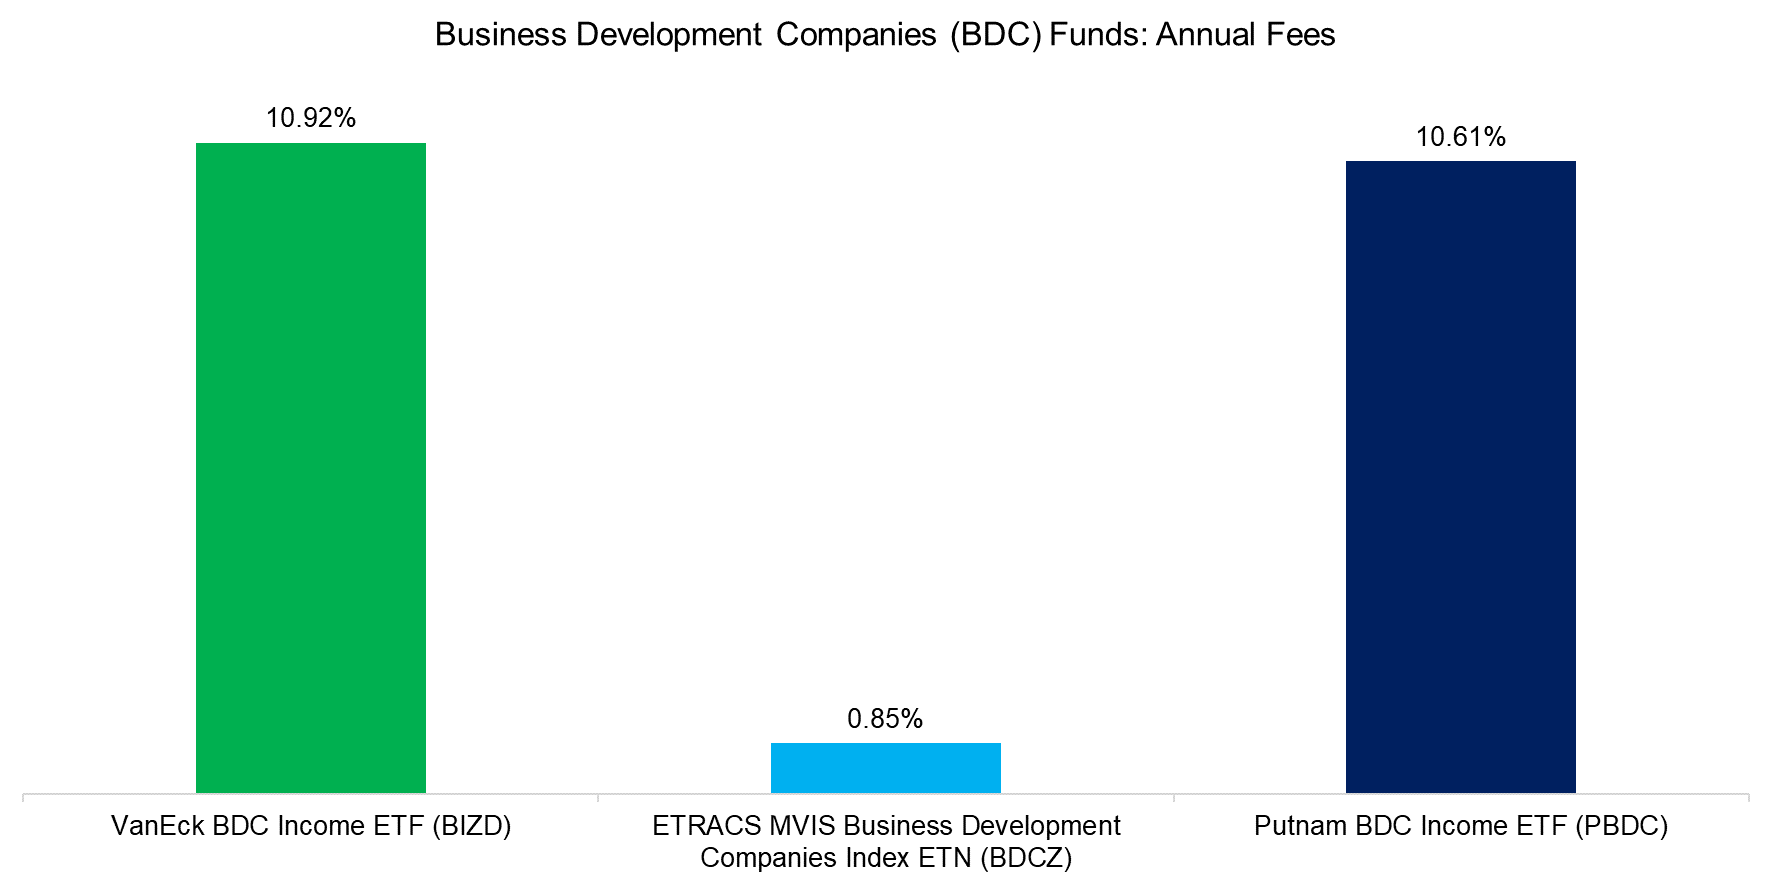 Business Development Companies (BDC) Funds Annual Fees